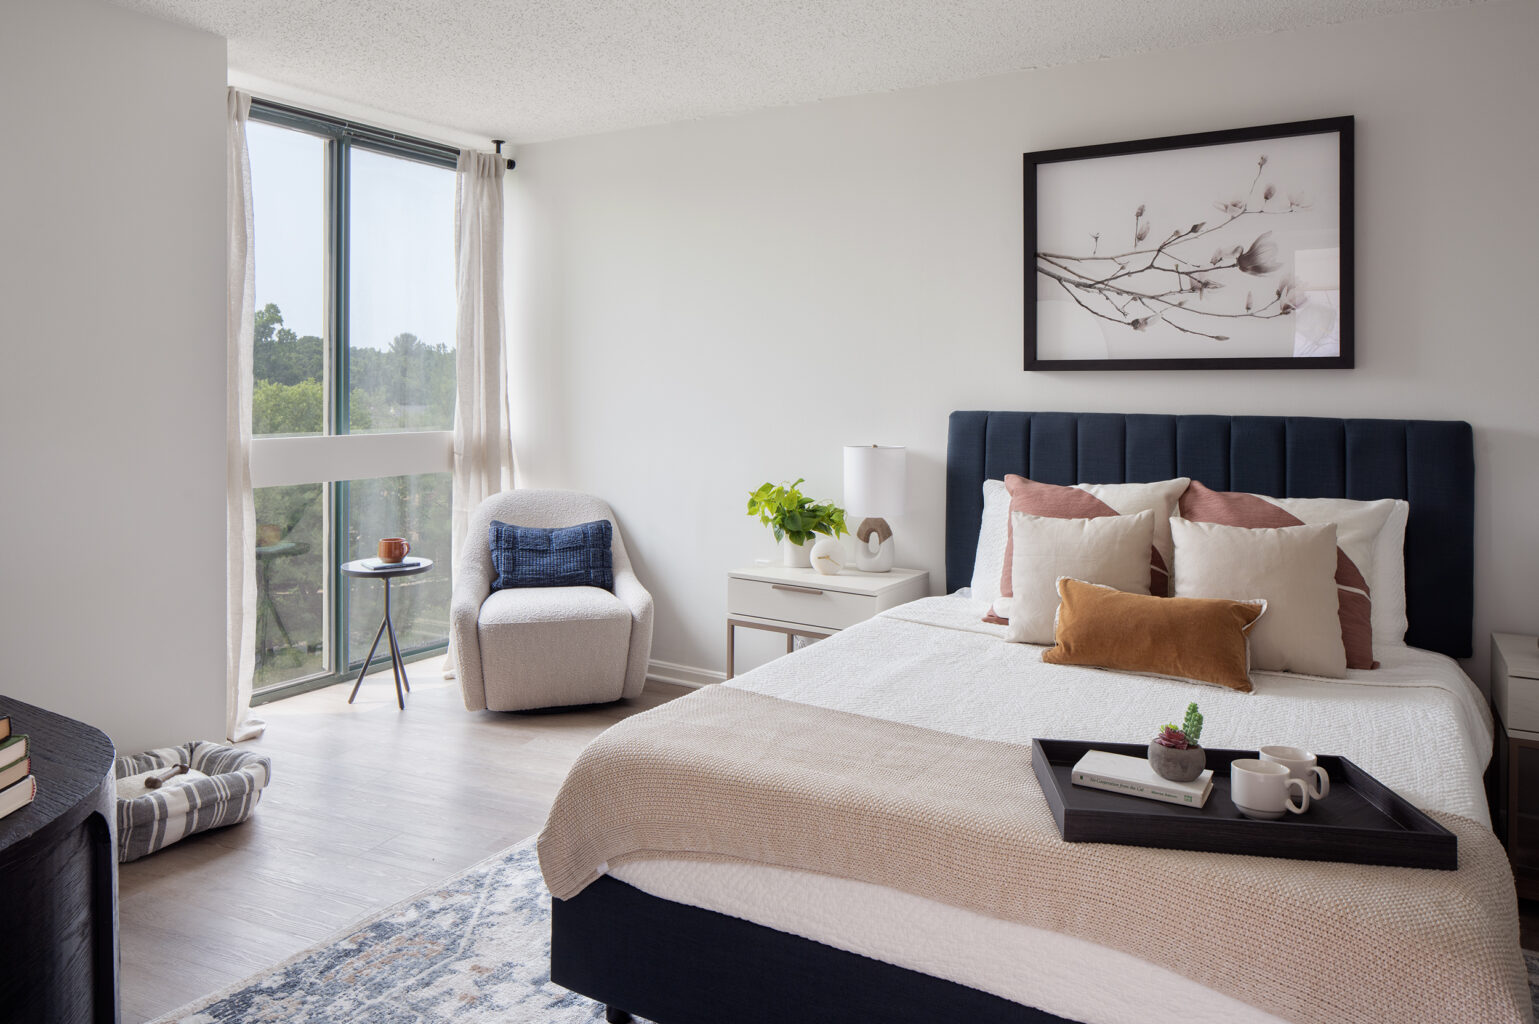 A modern, organically decorated bedroom with floor to ceiling windows and tree views.